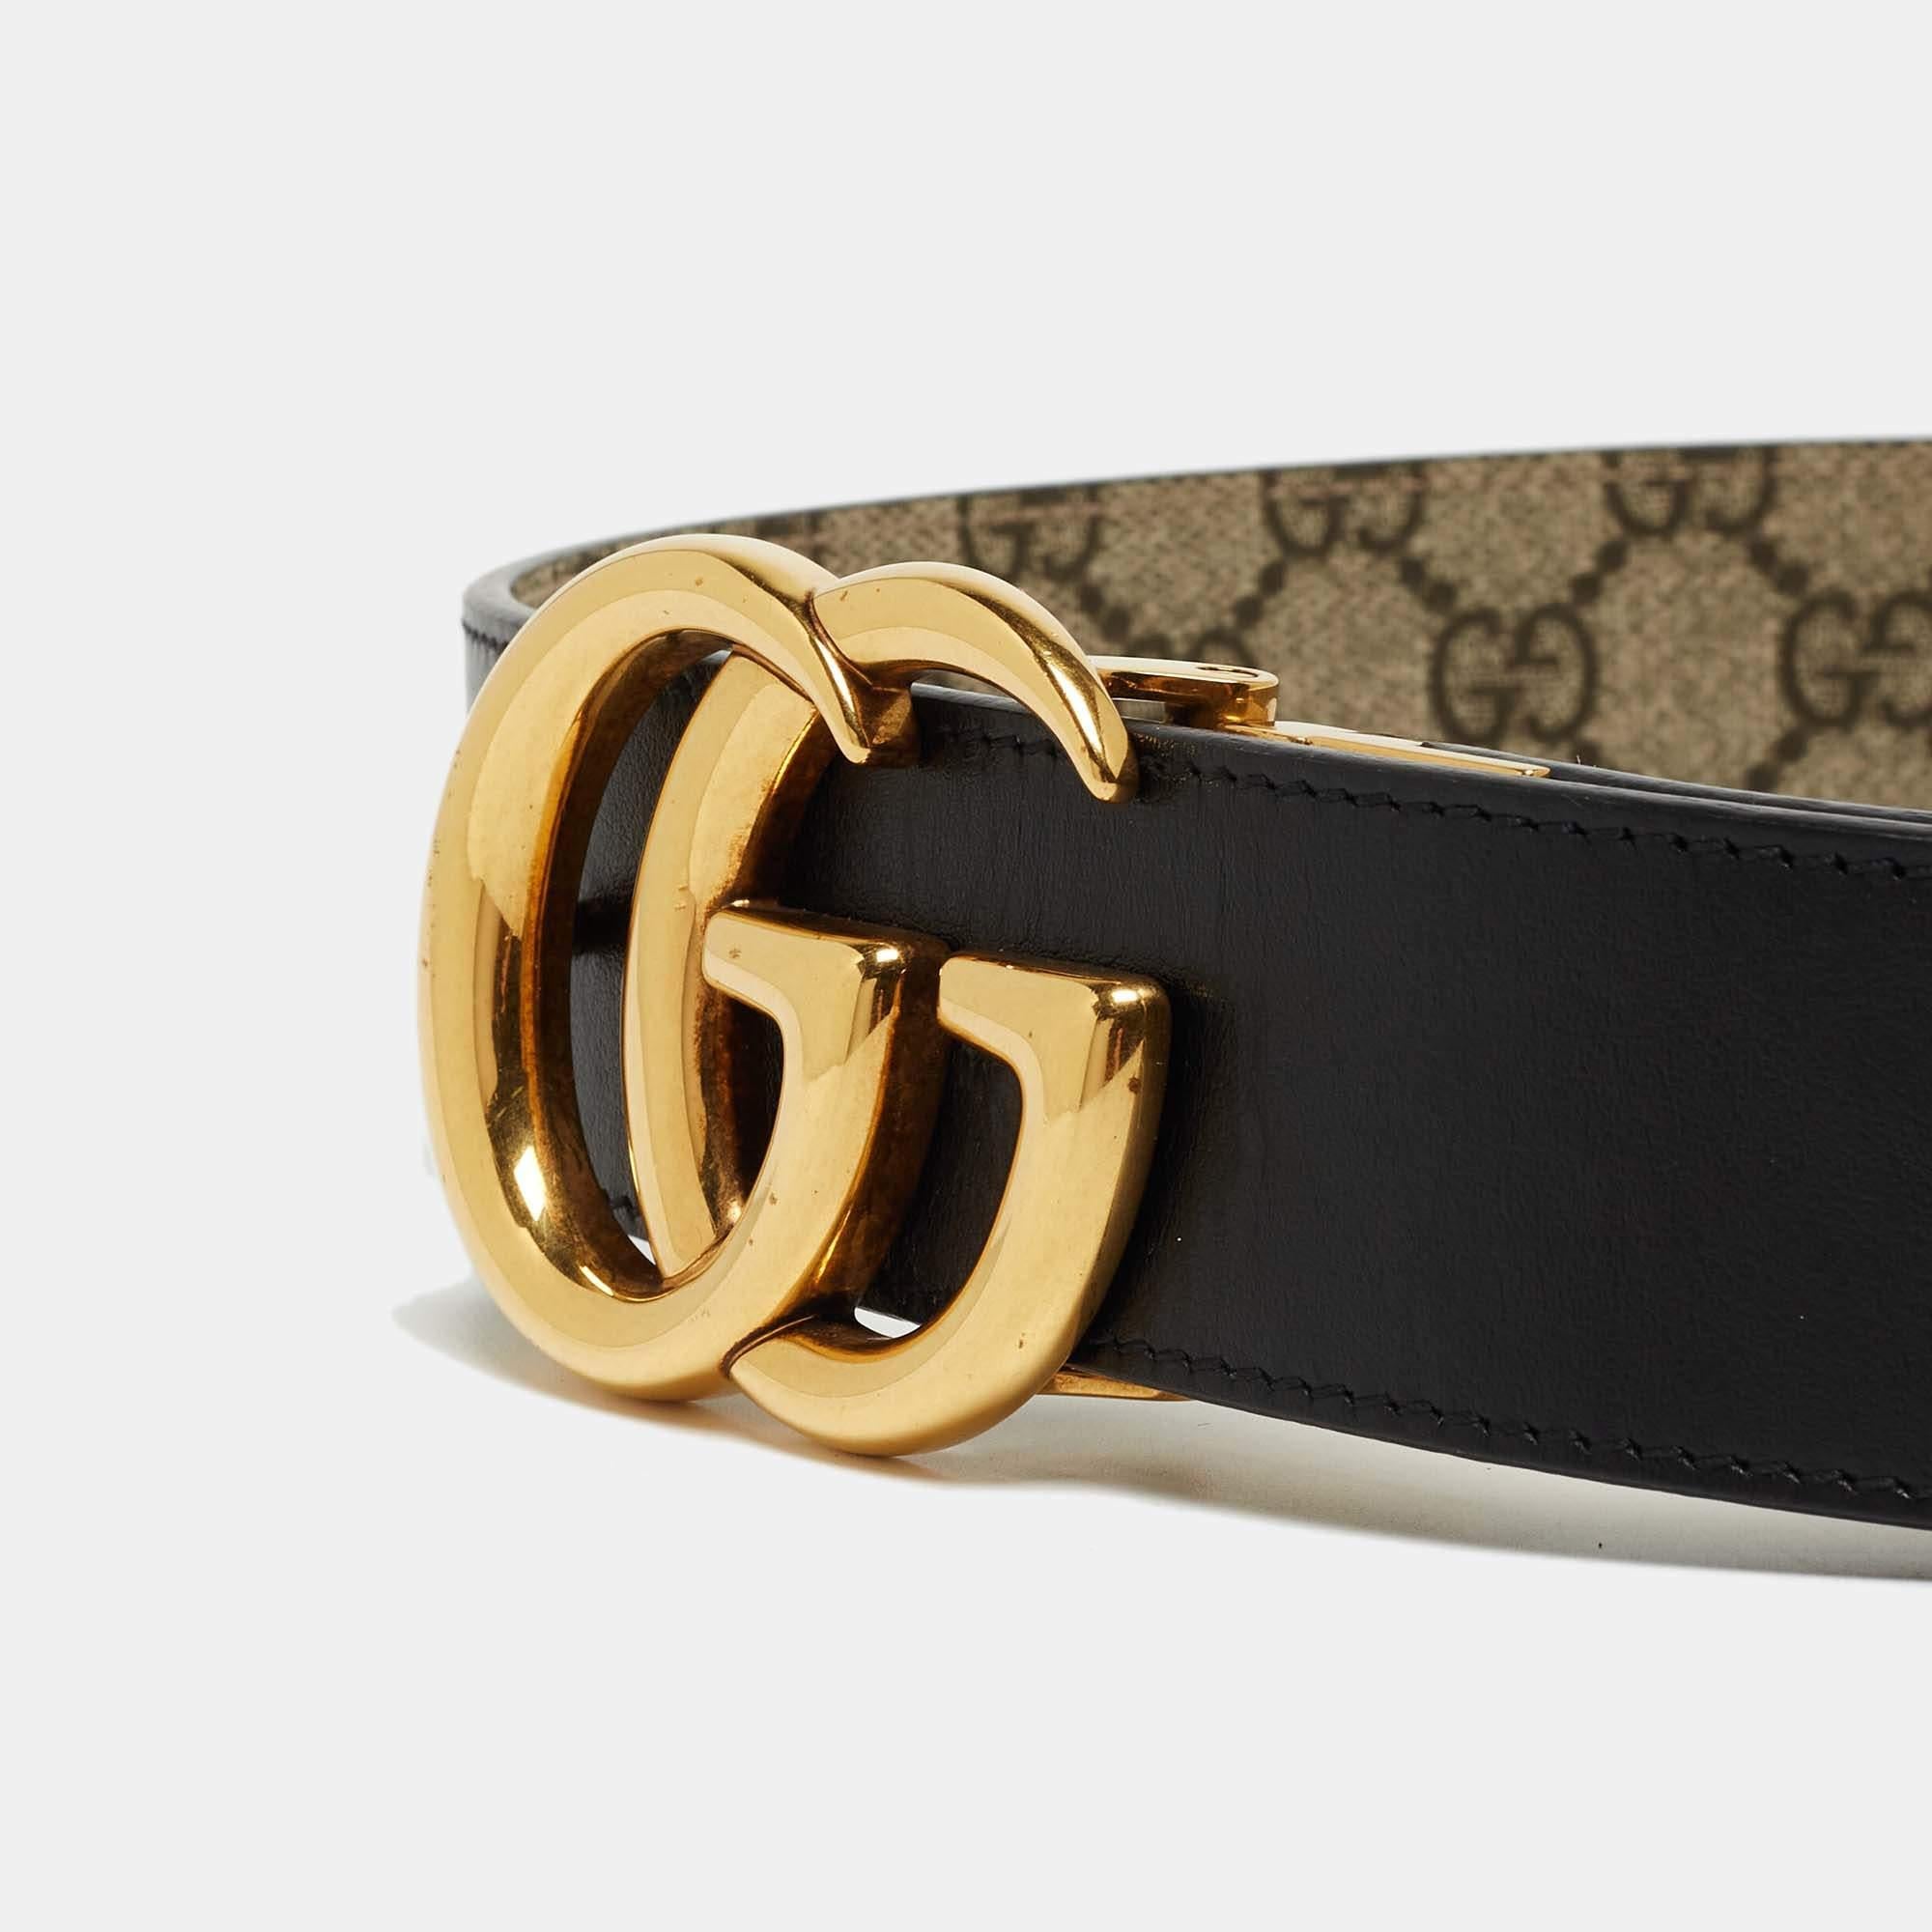 Belts are always a good option to add to your collection. Take your styling game a level up with this belt from Gucci. It is crafted from GG Supreme & leather, and it has a GG buckle.

